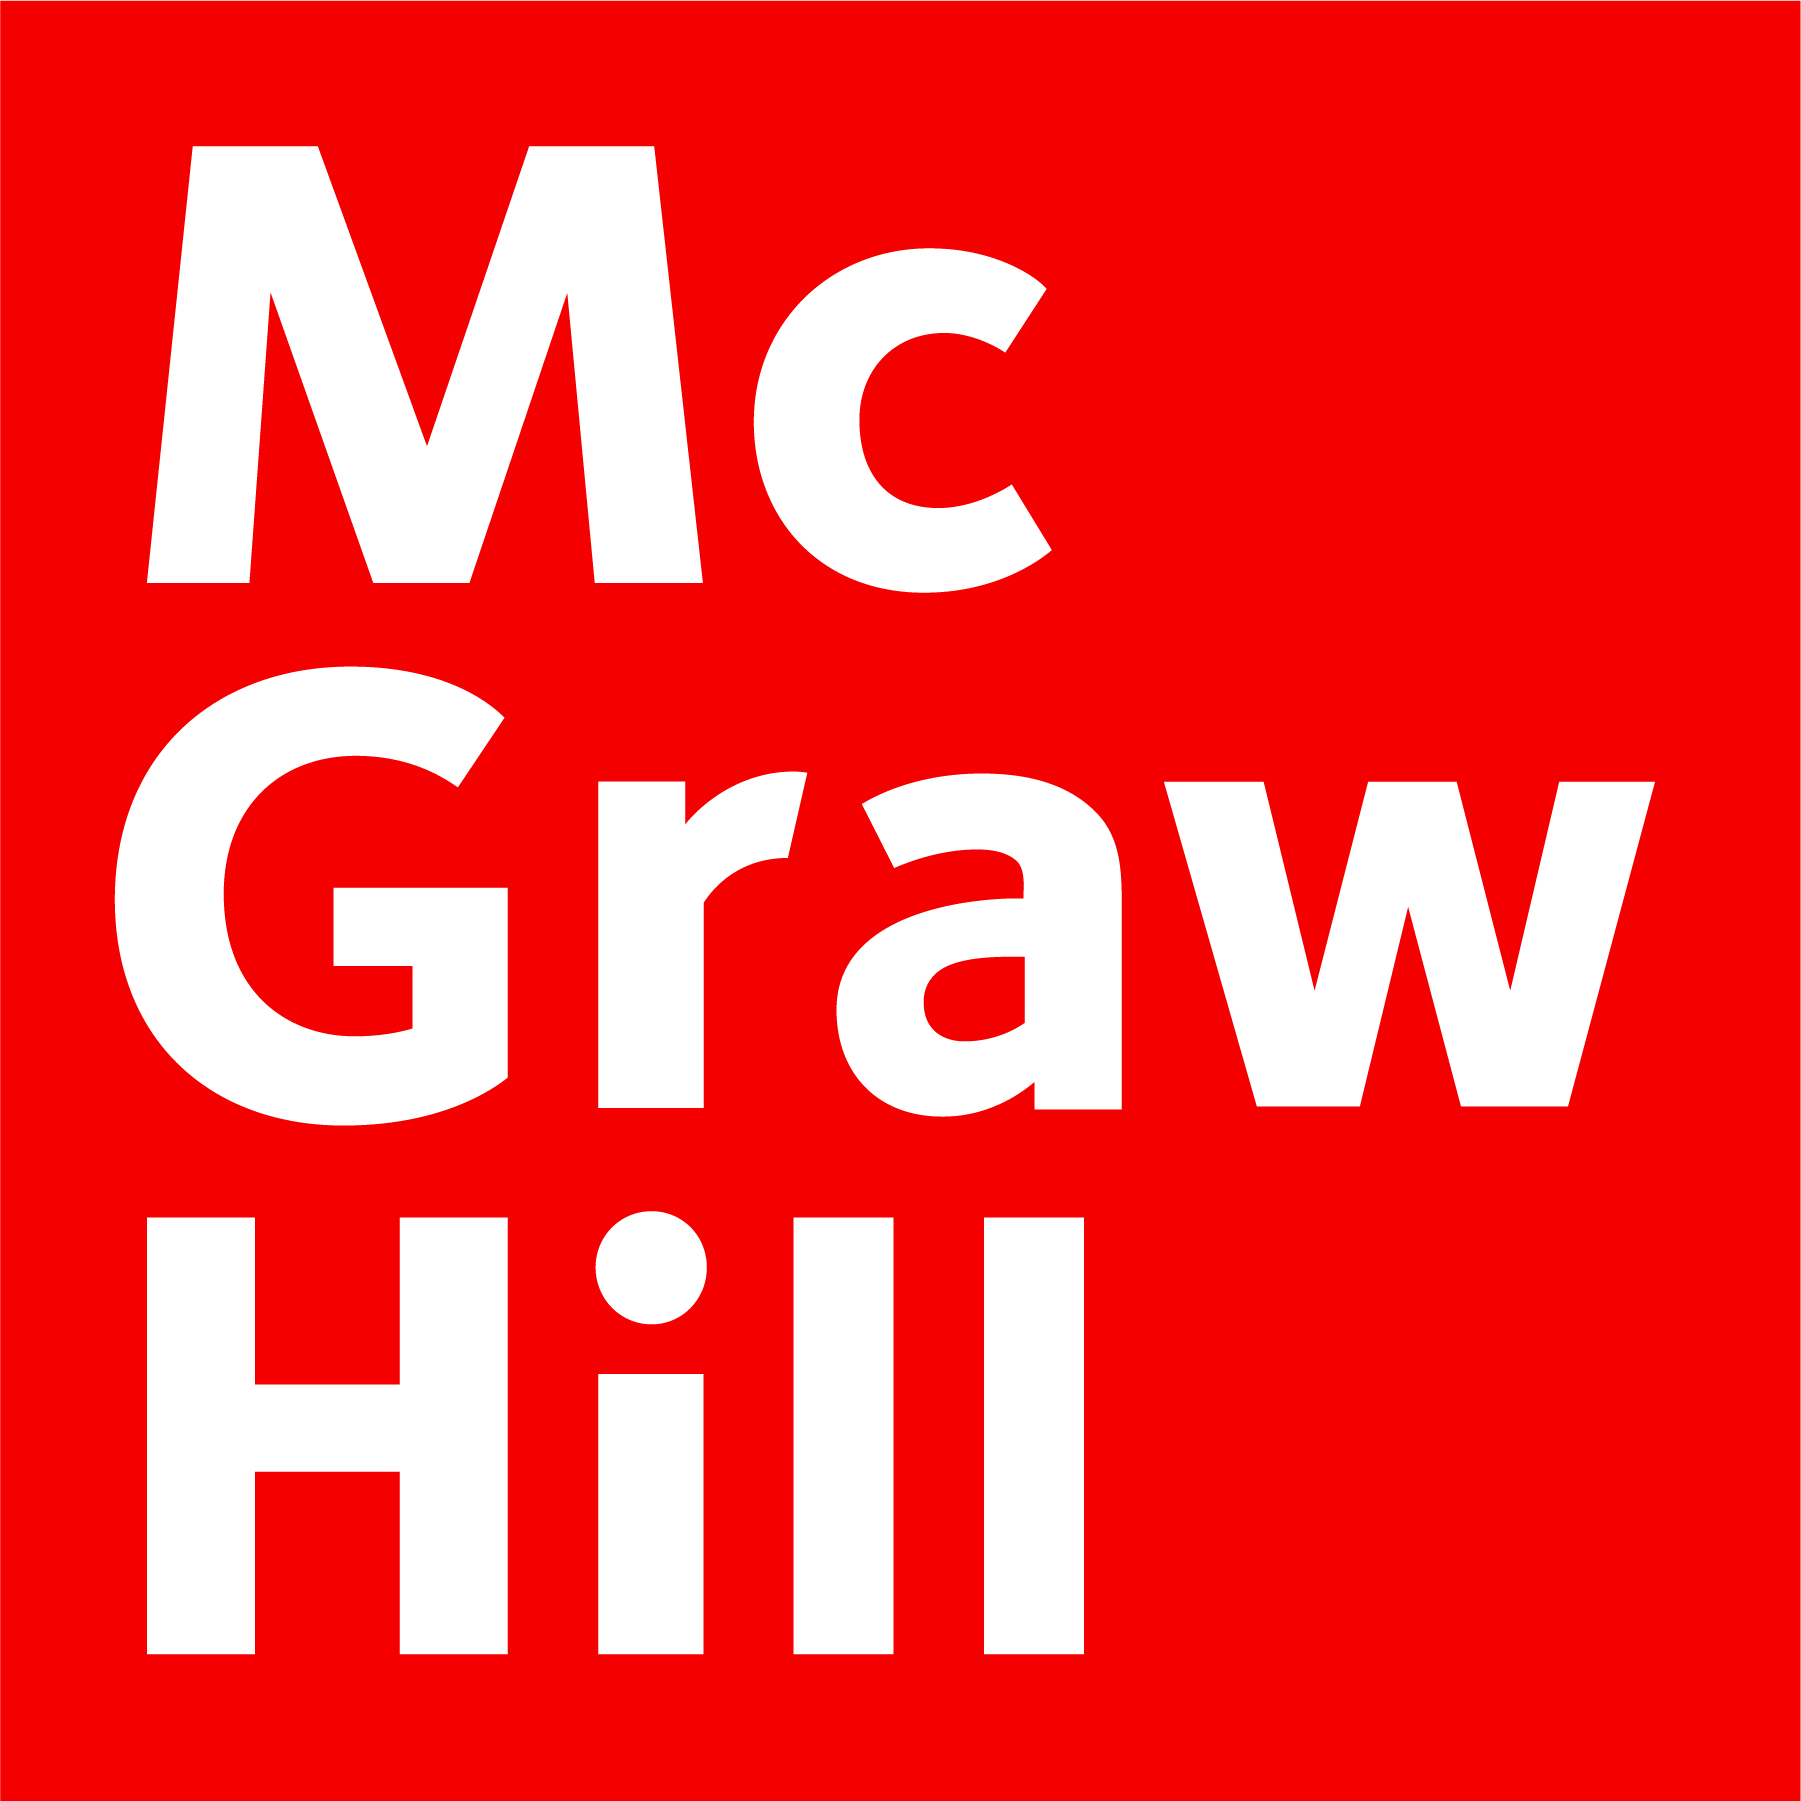 McGraw Hill Higher Education